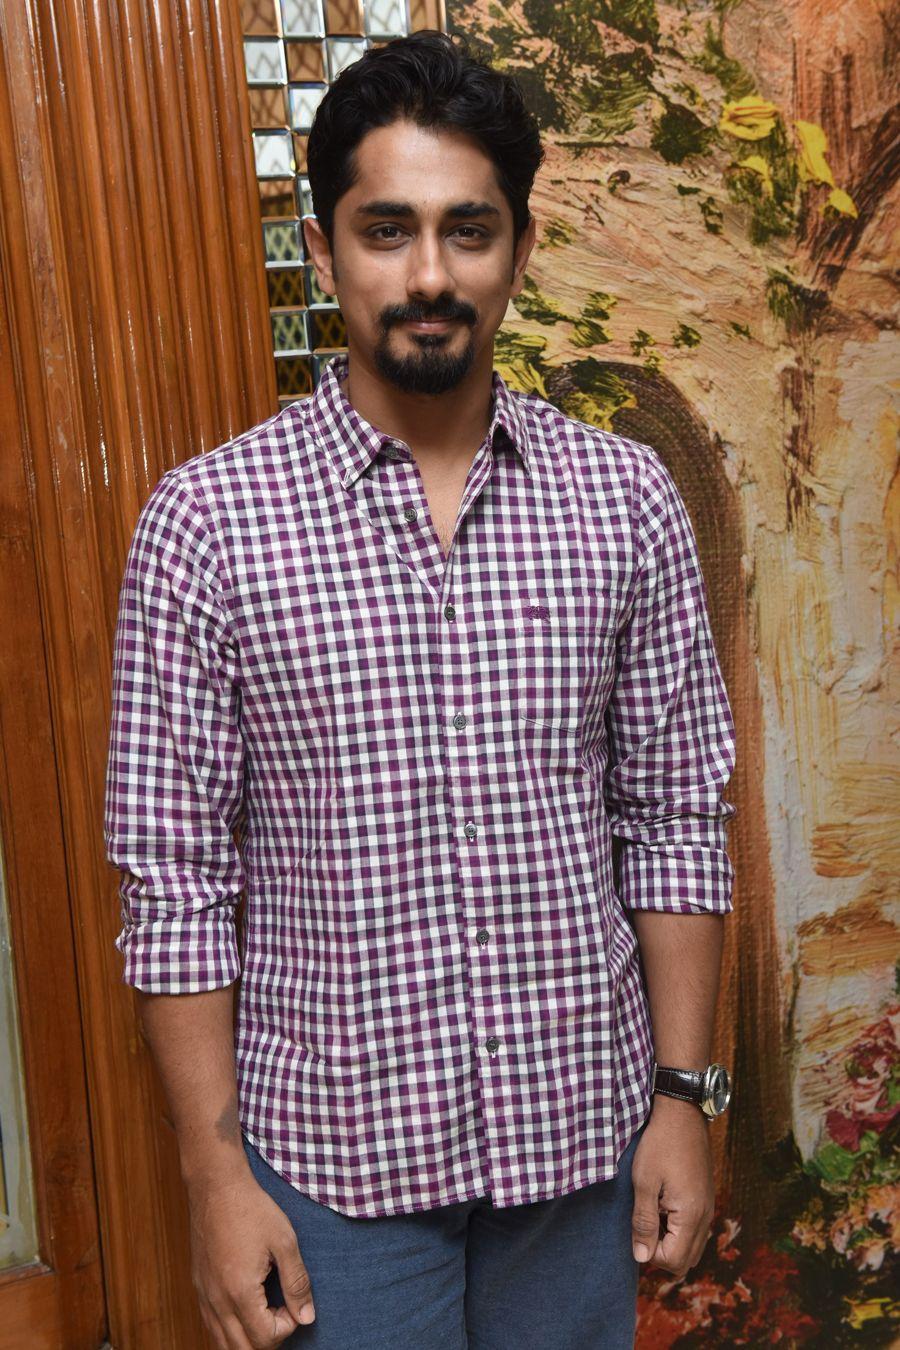 Siddharth & Andrea Jeremiah launches Wink Salon Photos